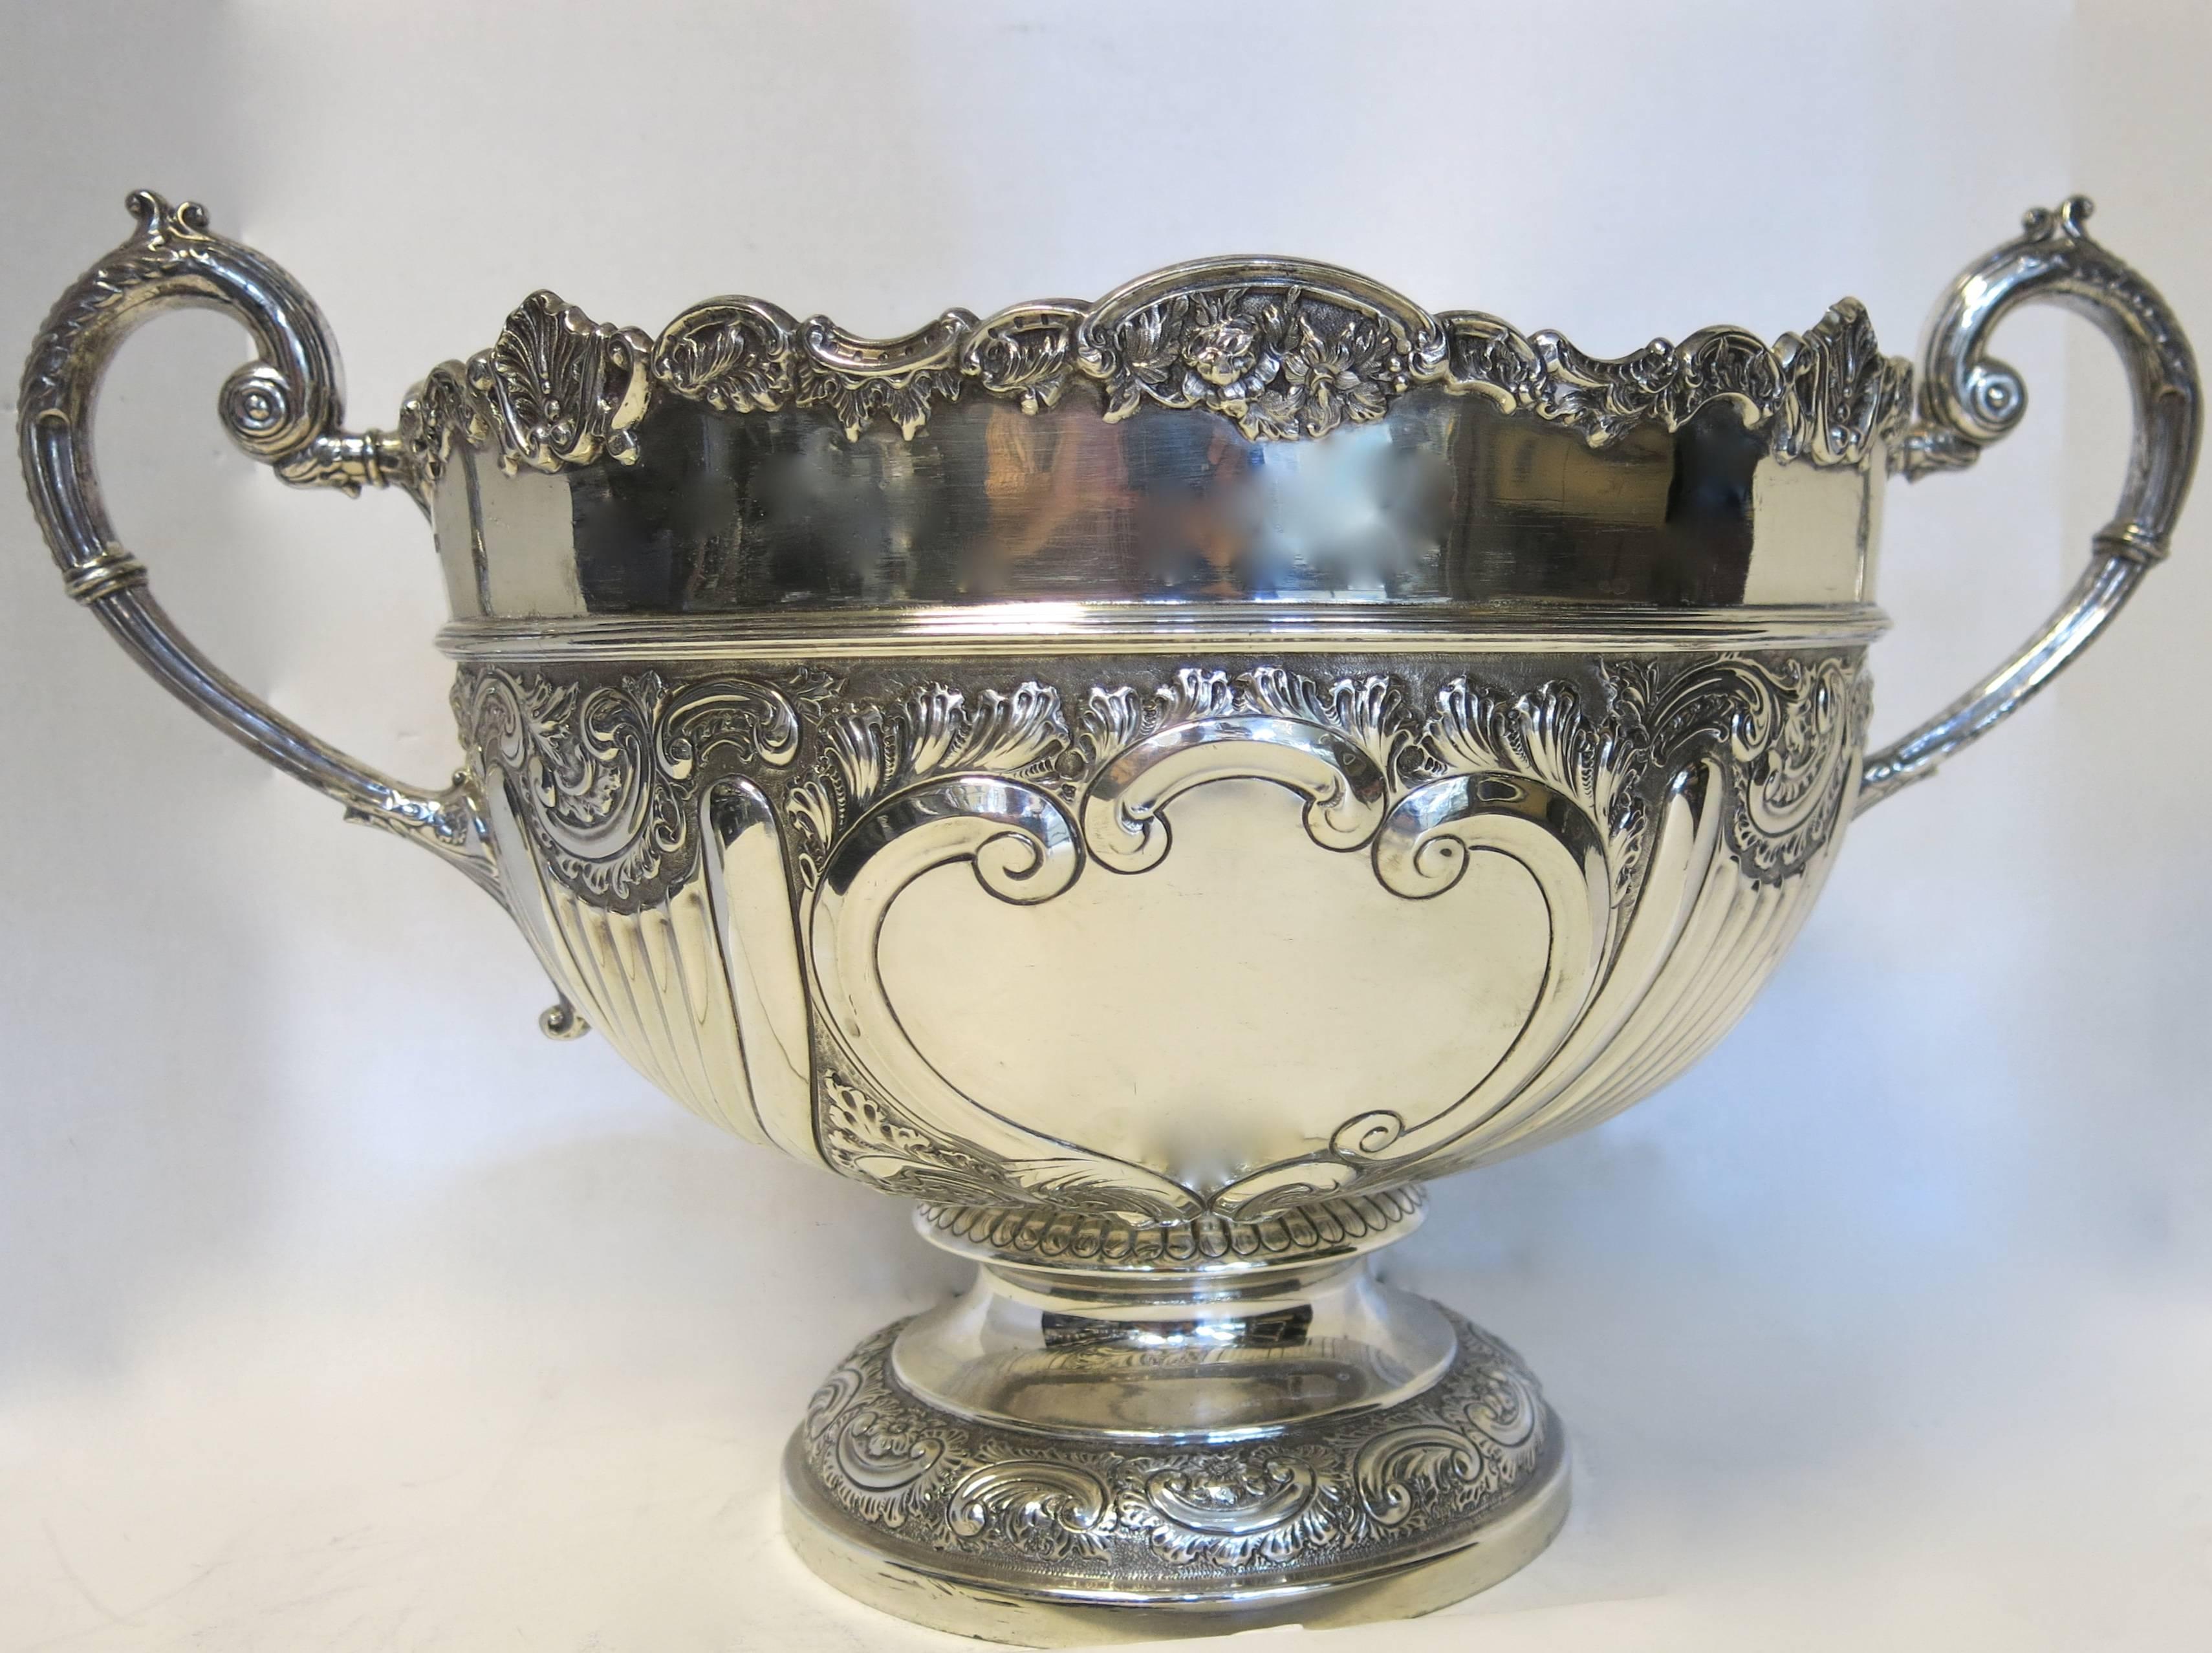 Large Round, 2 Handled, Sterling Silver Bowl, Made By John & William Deakin, Hallmarked For 1905. Exceptional Quality. 
13.25